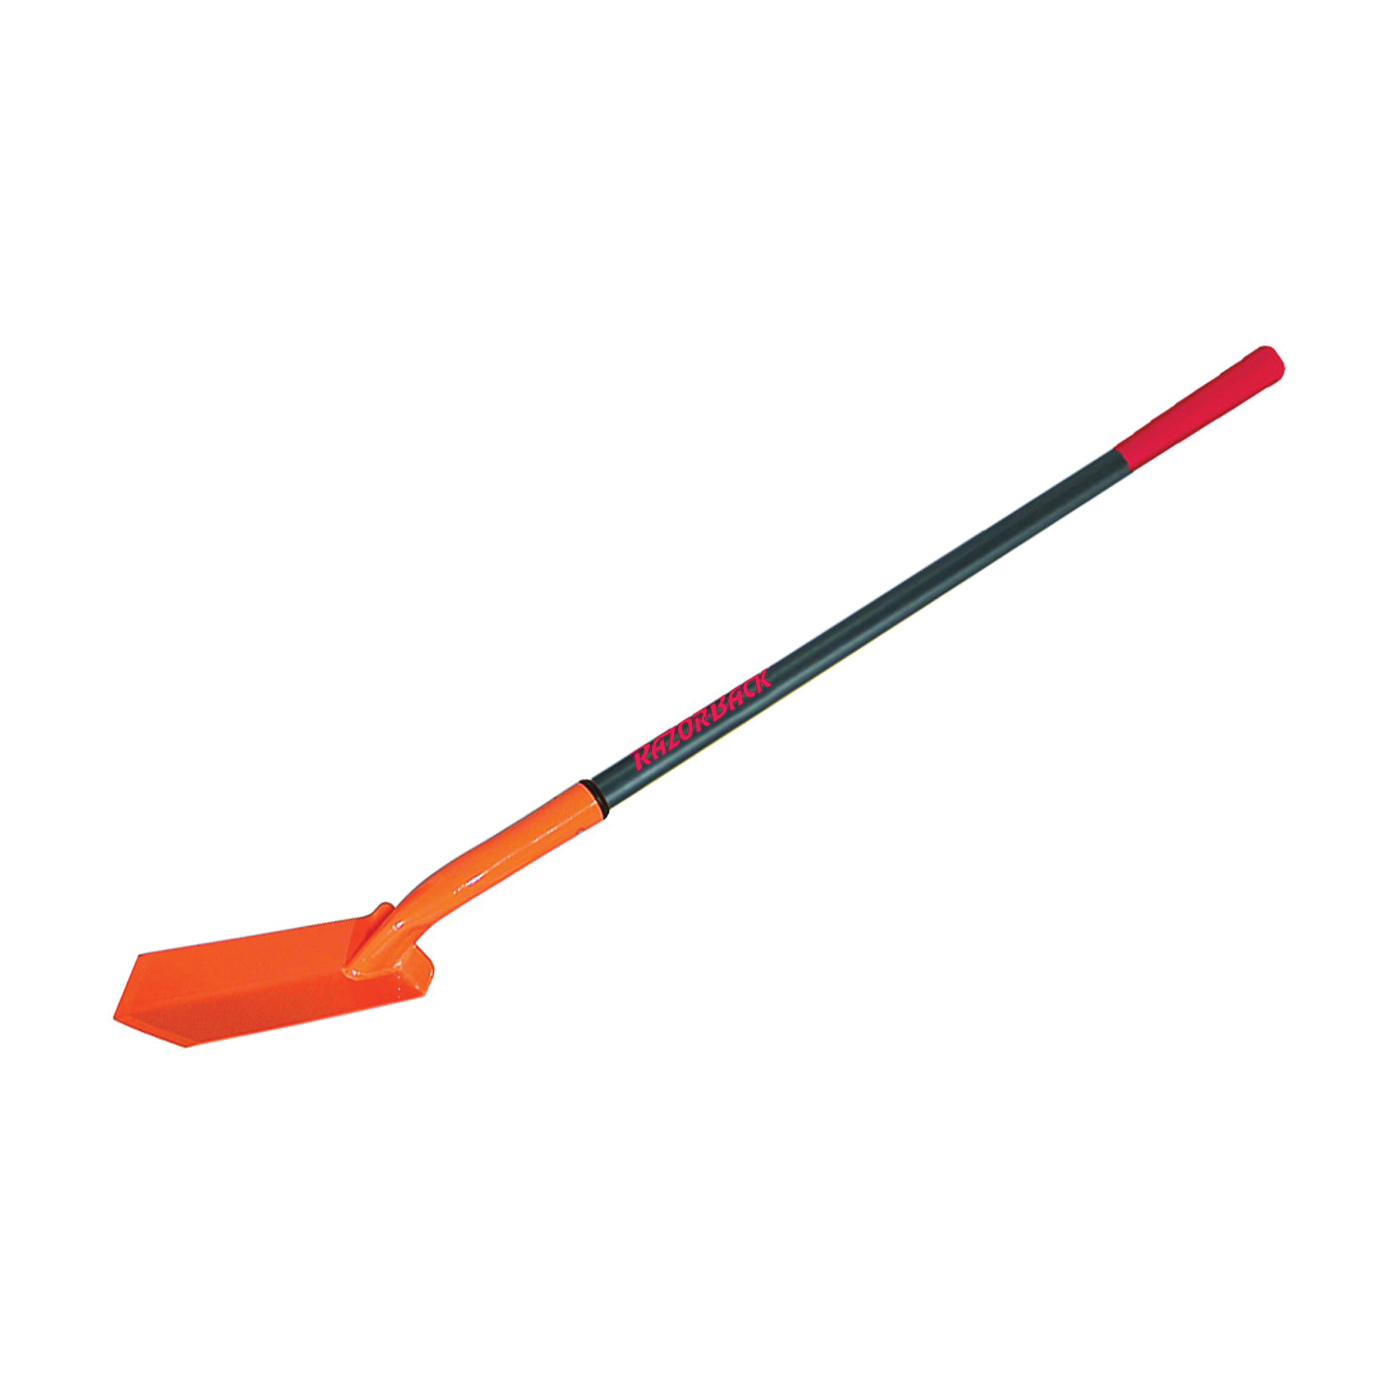 47034 Trenching Shovel, 4 in W Blade, Steel Blade, Fiberglass Handle, Extra Long Handle, 43 in L Handle